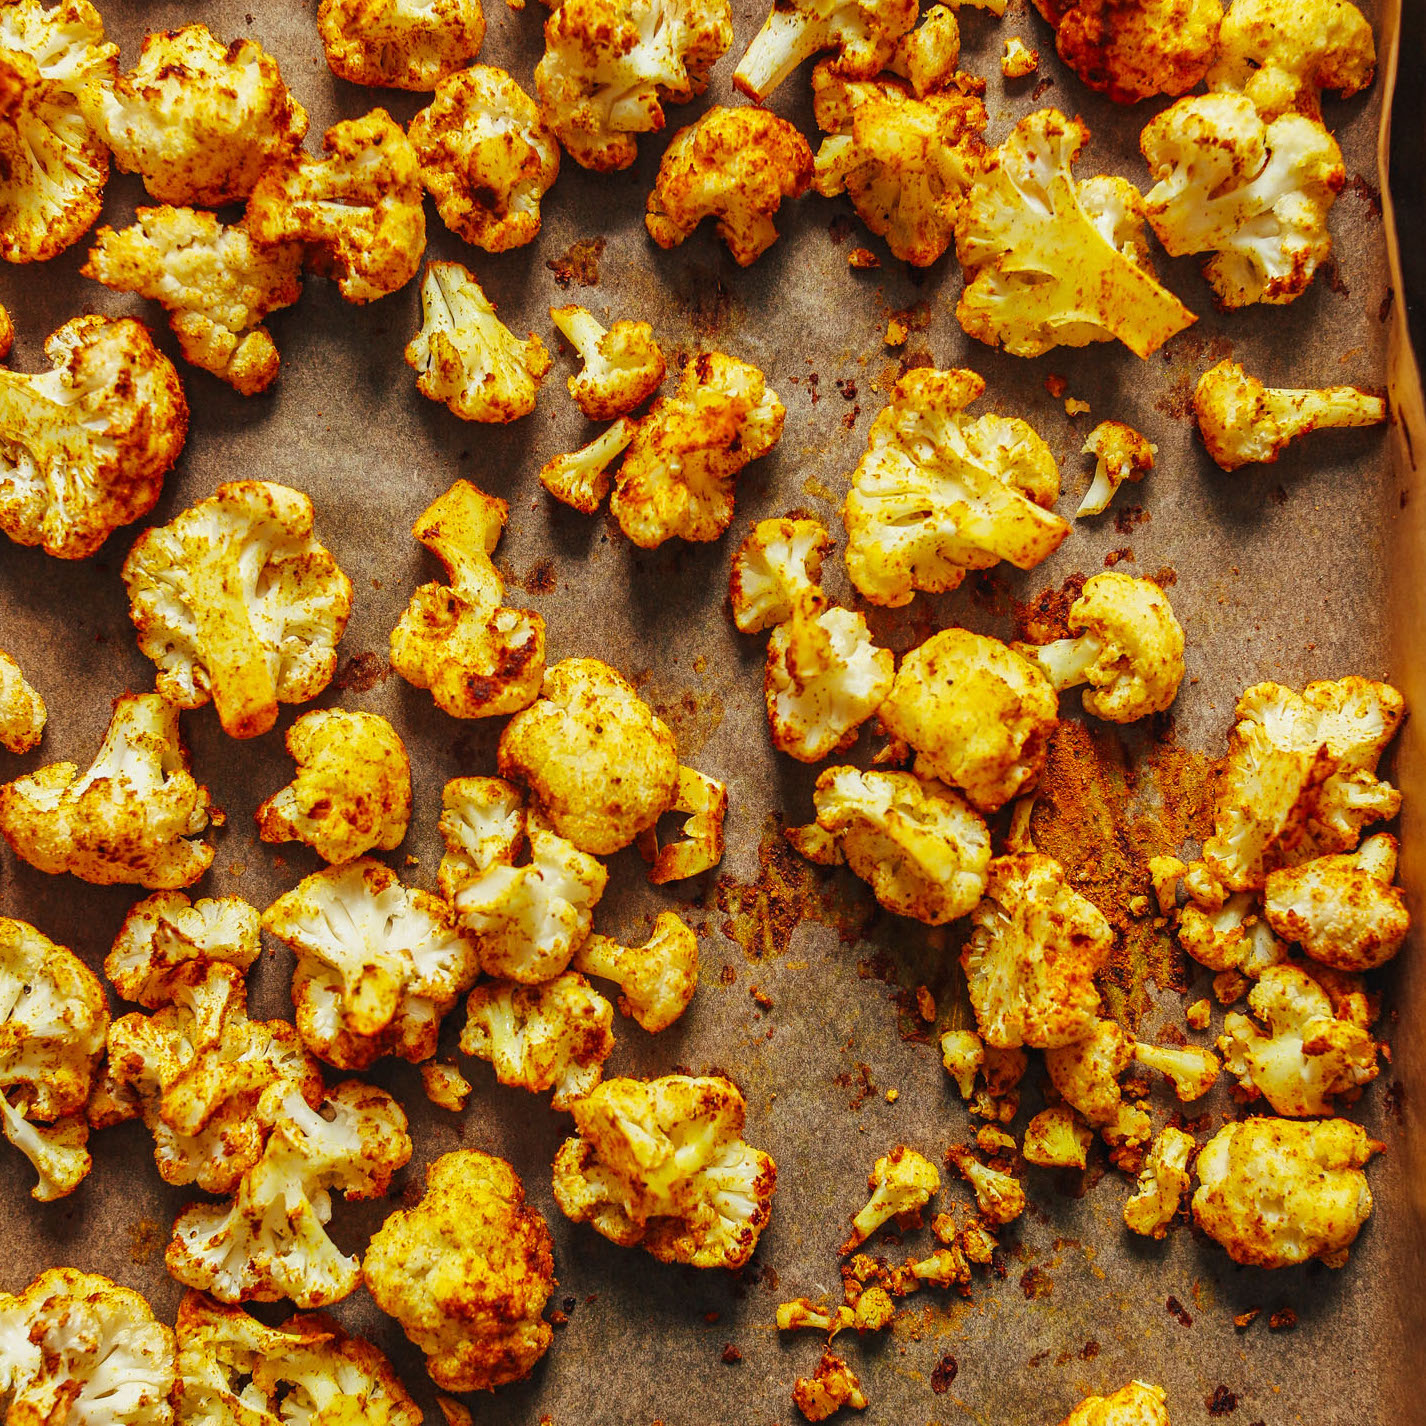 Parchment-lined baking sheet filled with Curry Roasted Cauliflower